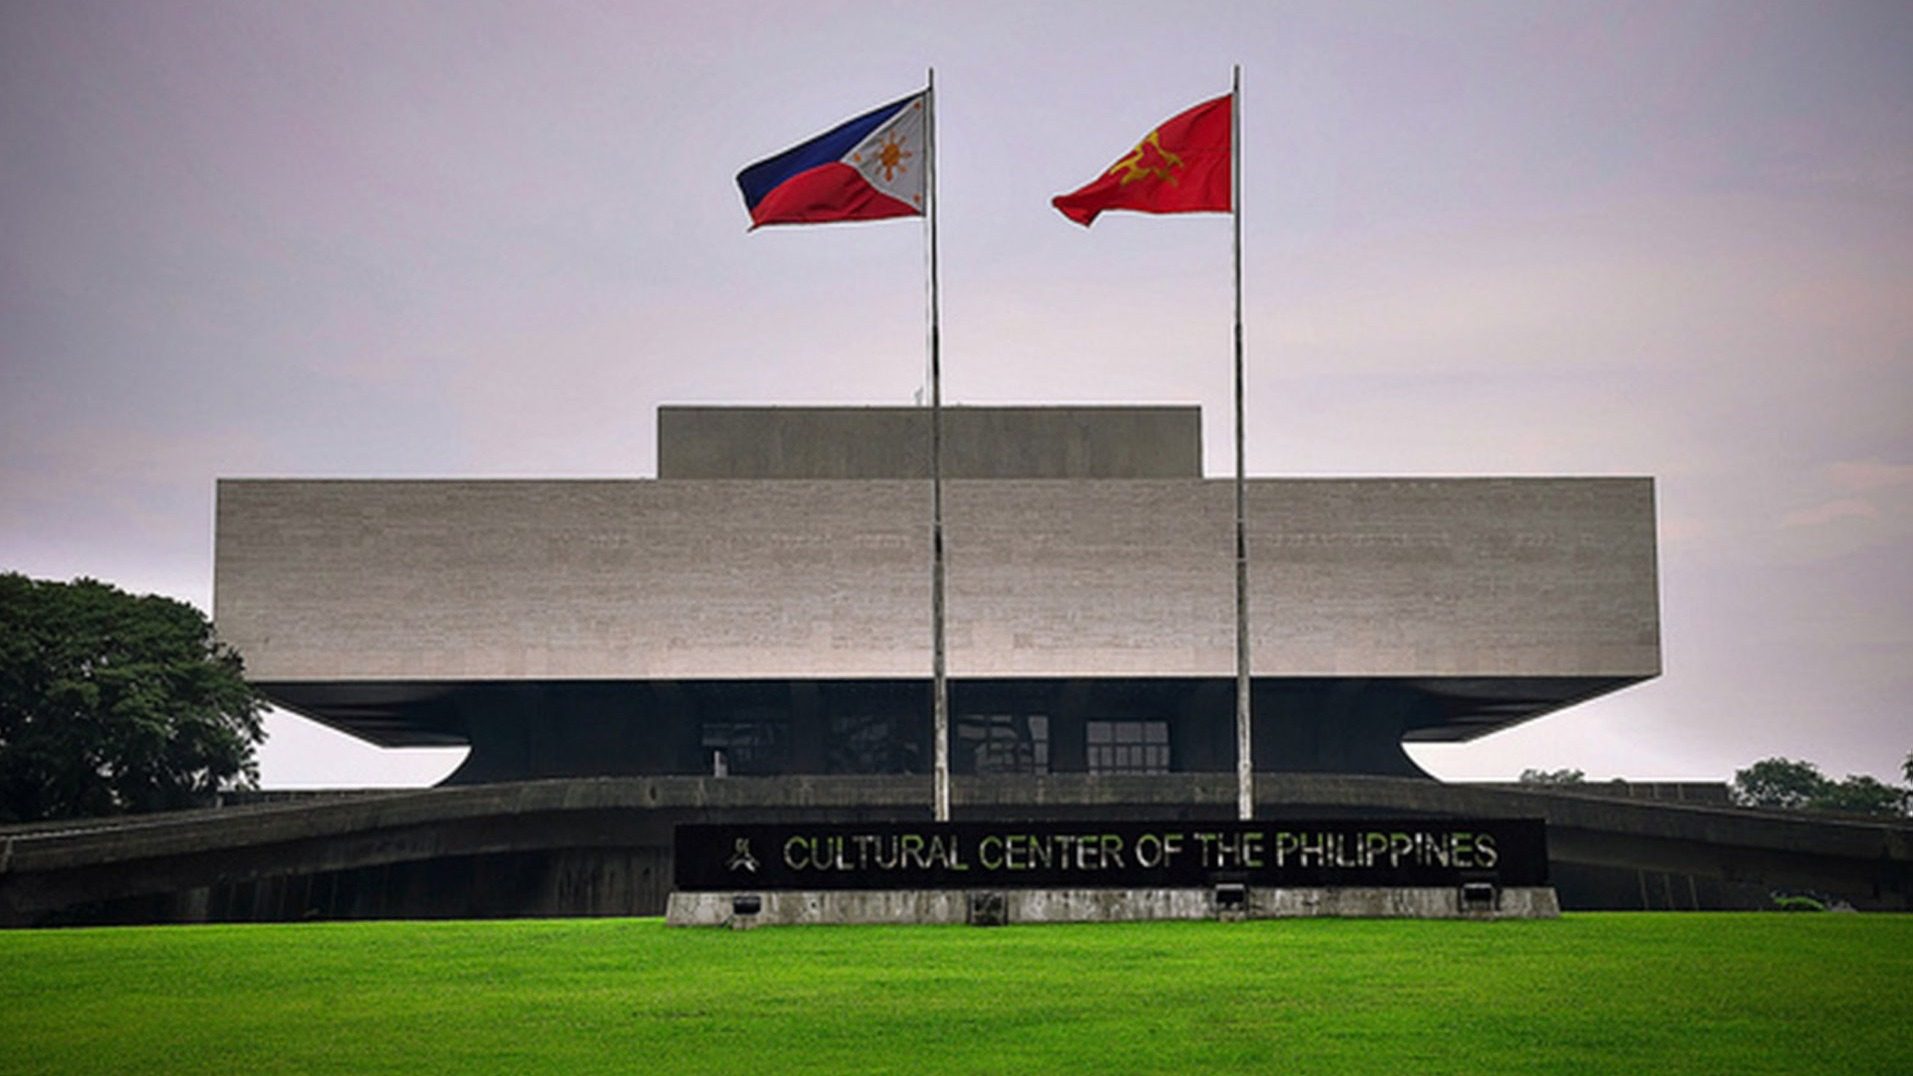 CCP grounds opens for jogging, fitness activities